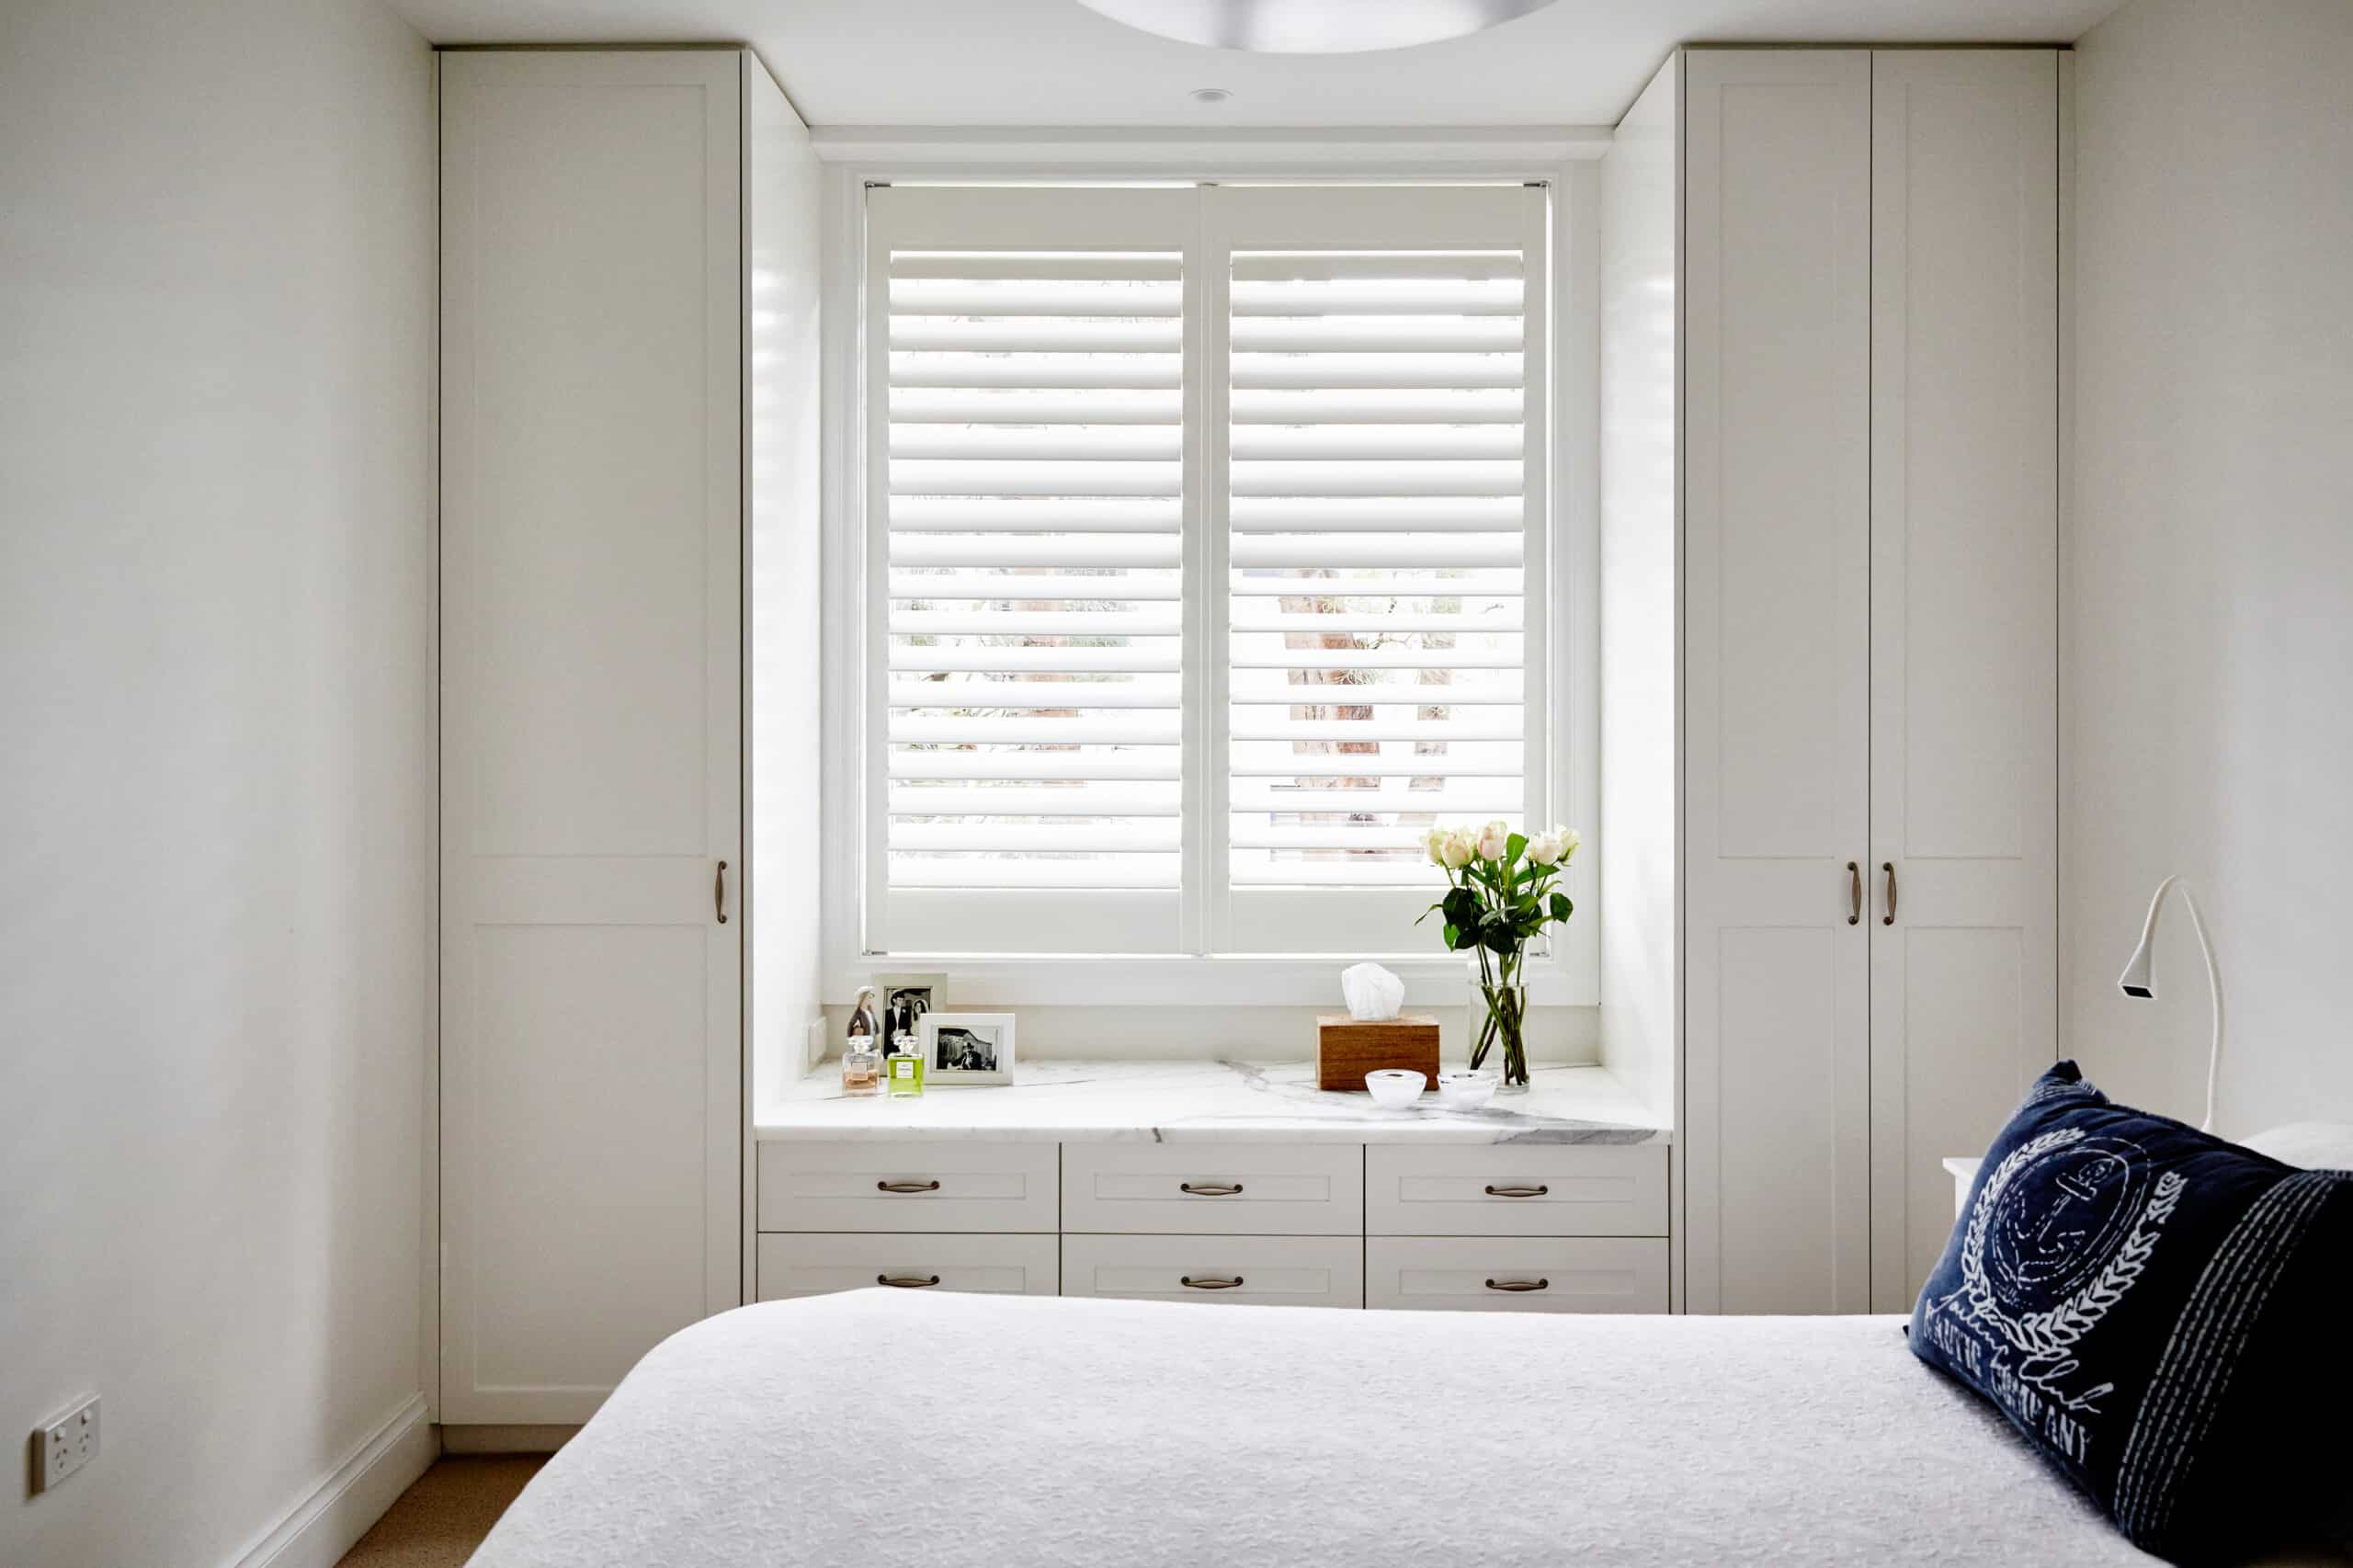 Interior photography of fresh and light bedroom with white bed, coastal style cushions, white built in cupboards and plantation shutters with decorative objects